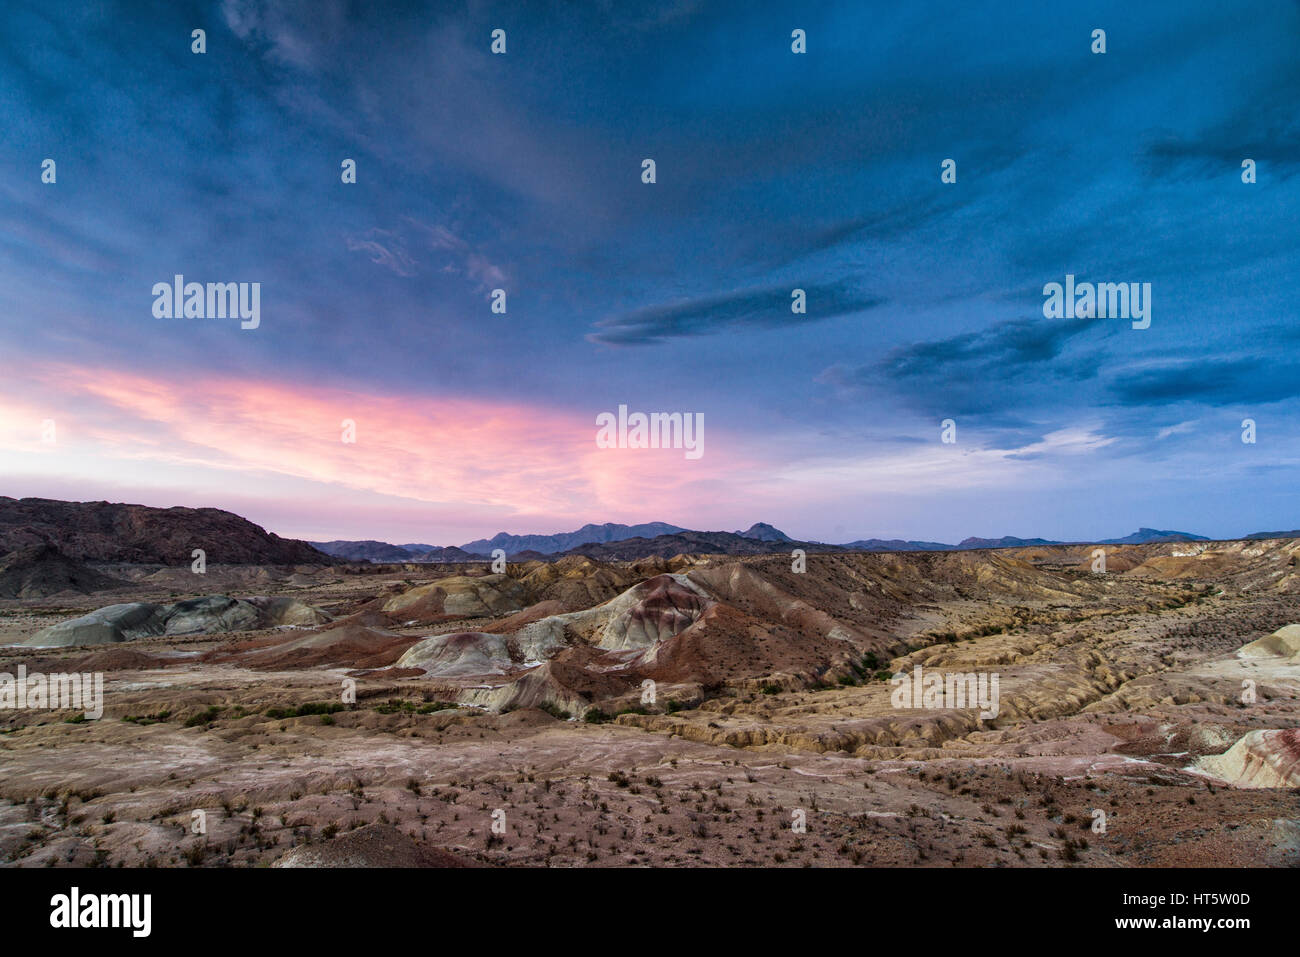 Big Bend Badlands landscape showing hills and mountains under pink sky at sunset, Texas Stock Photo